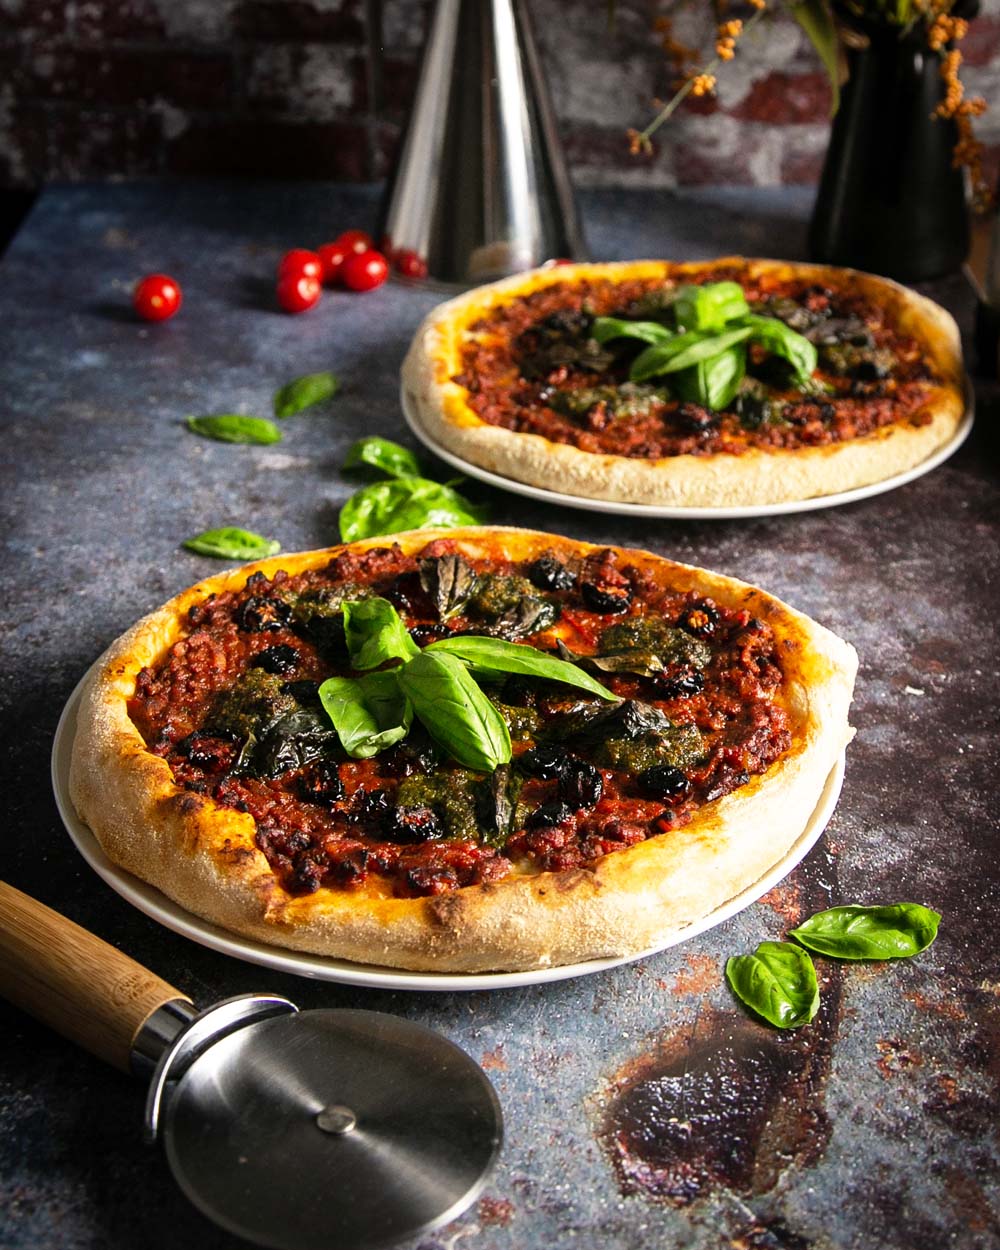 Angle view of 2 pesto Genovese pizza’s on plates with a dark marble background